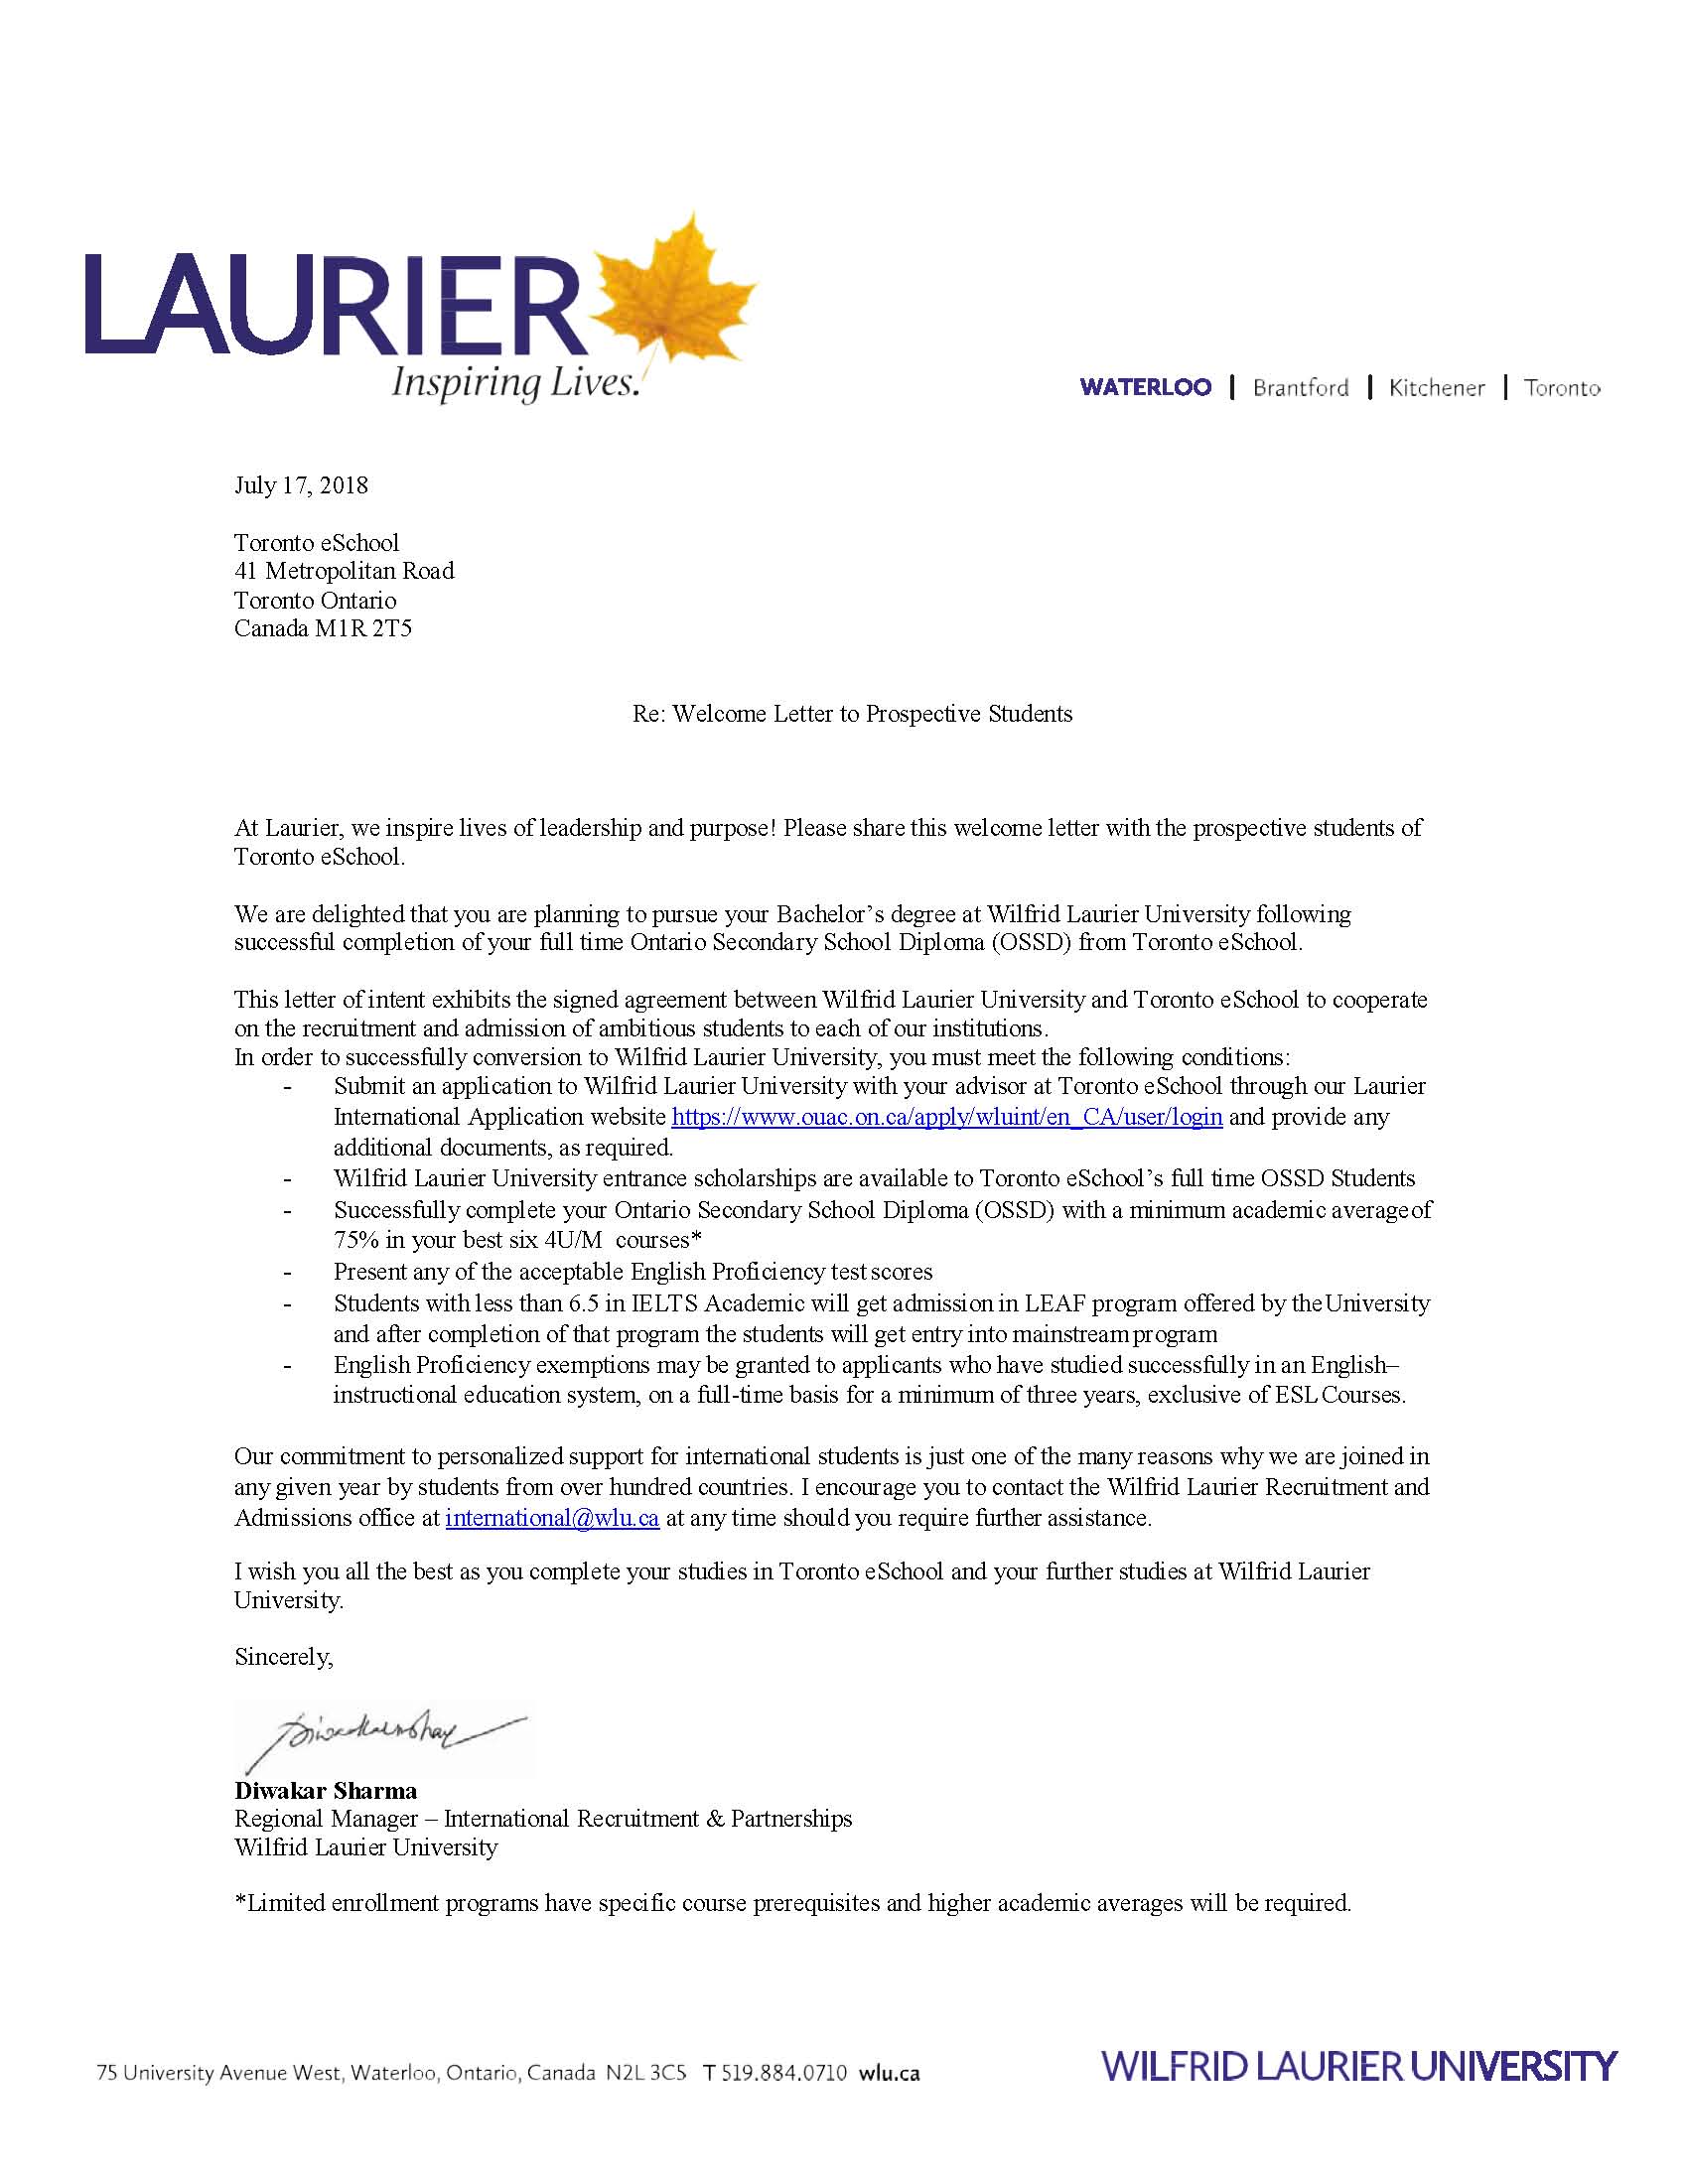 Laurier University Welcome Letter